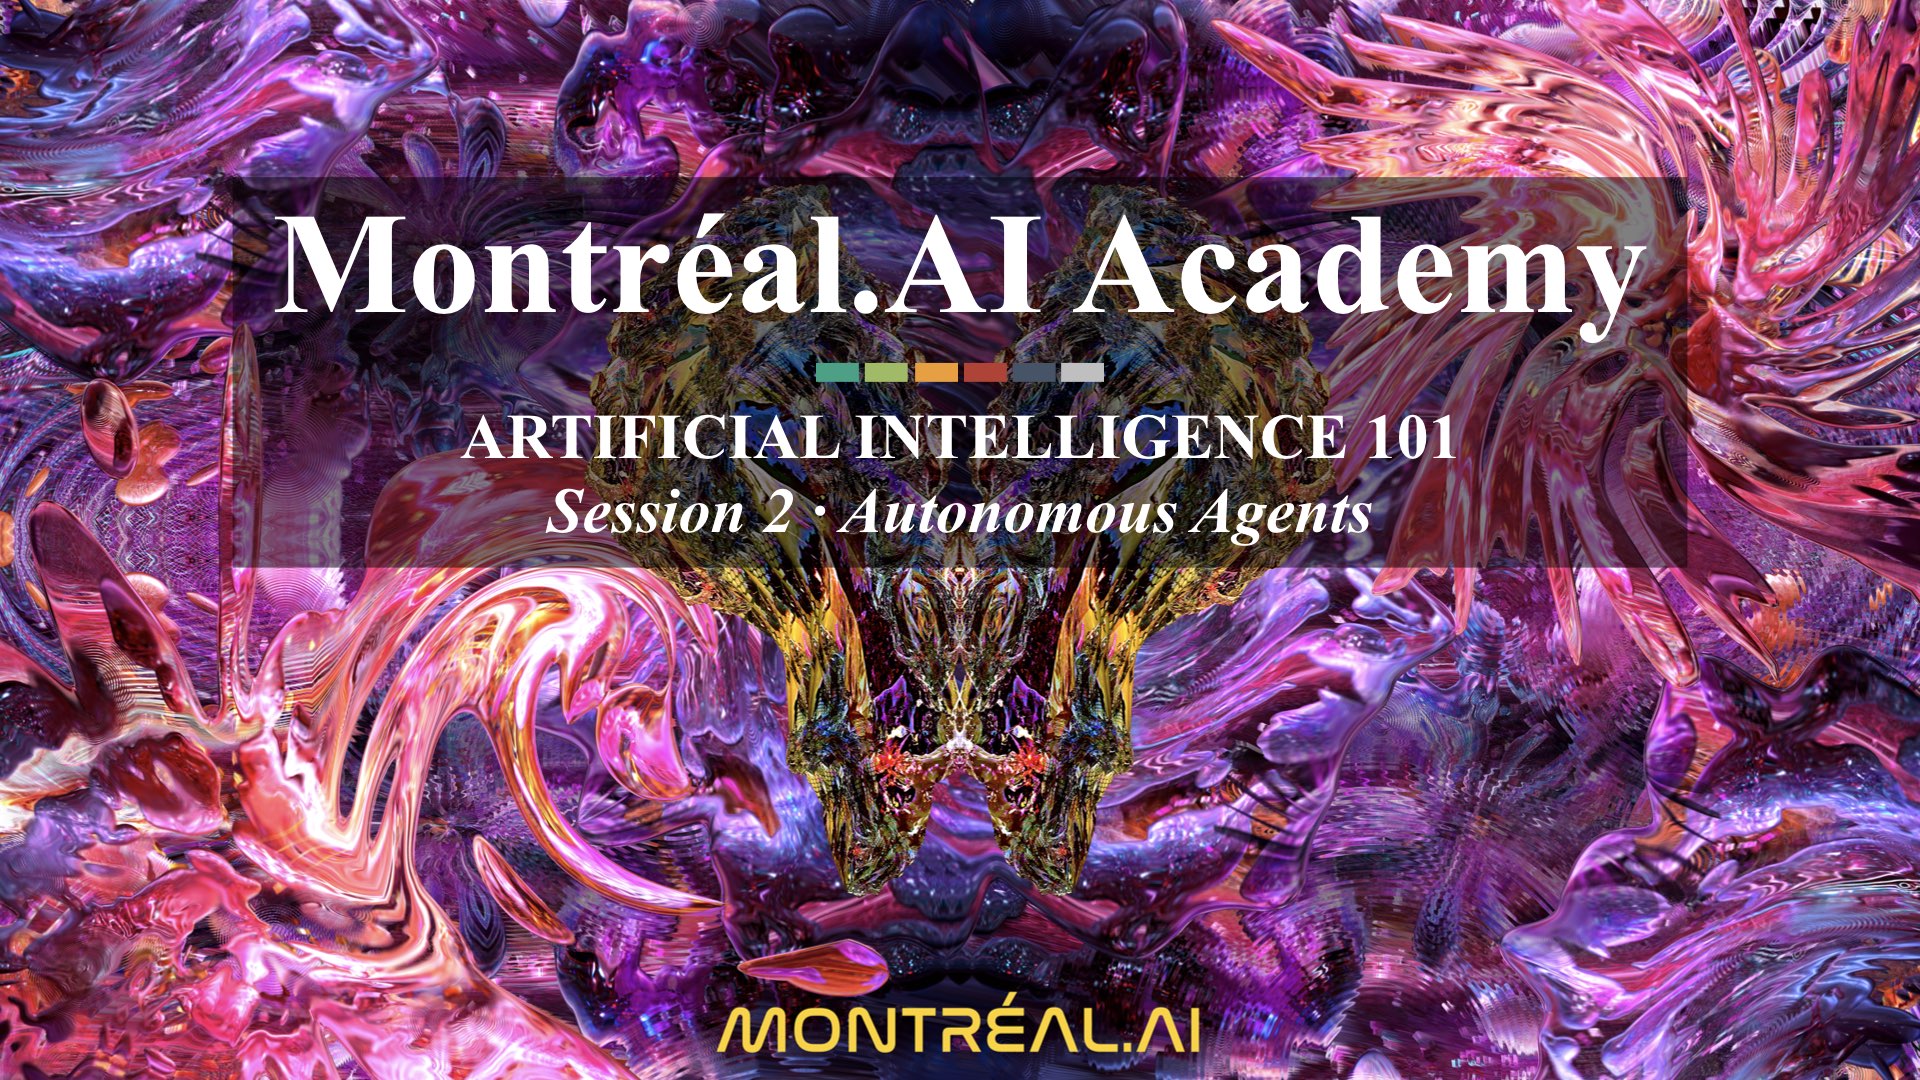 Artificial Intelligence 101: The First World-Class Overview of AI for the General Public | Autonomous Agents